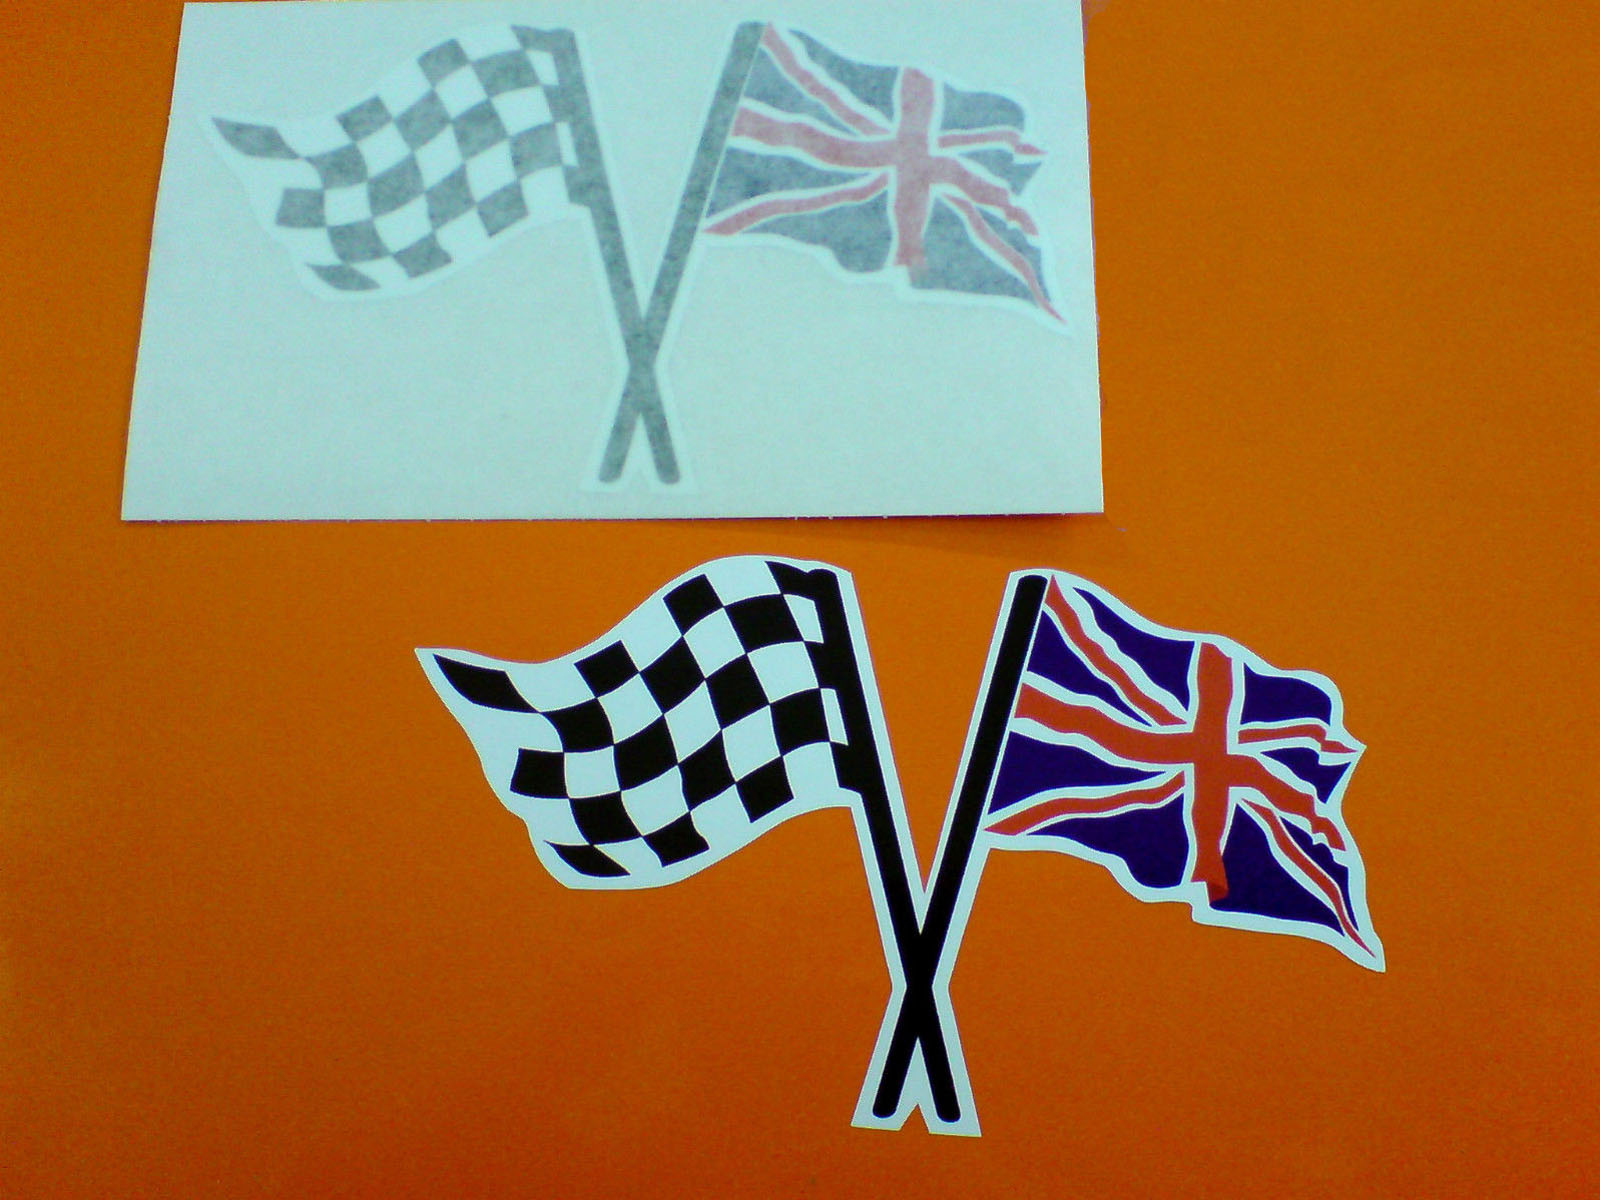 Two crossed flags on poles. A black and white chequered and a red, white and blue Union Jack.